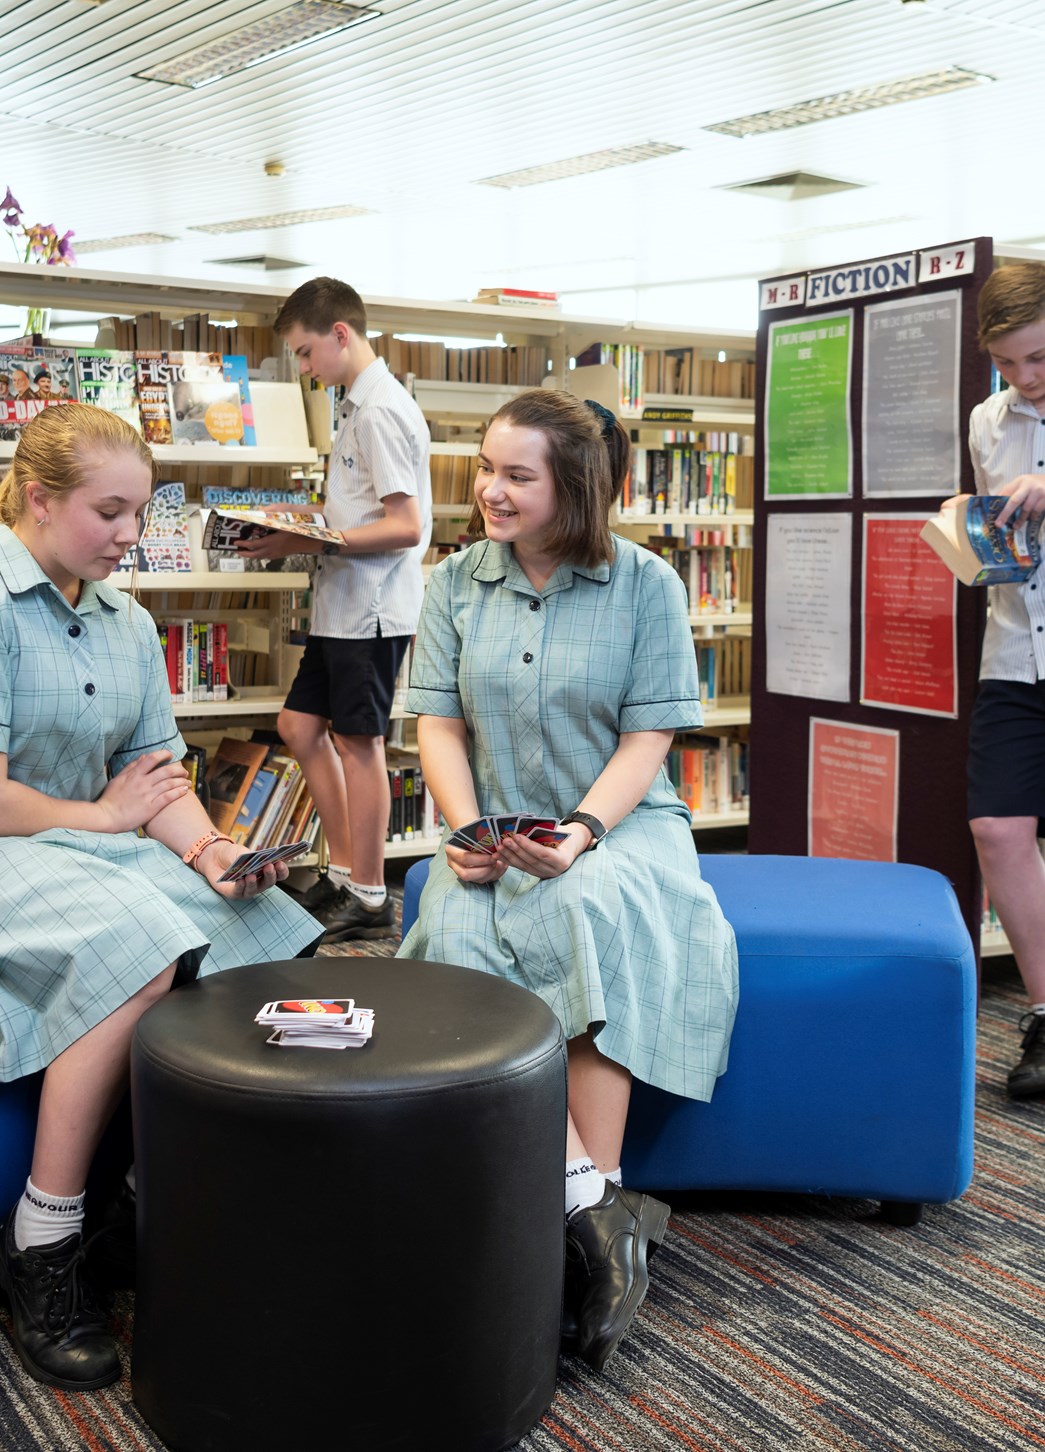 Students playing games and reading on school library